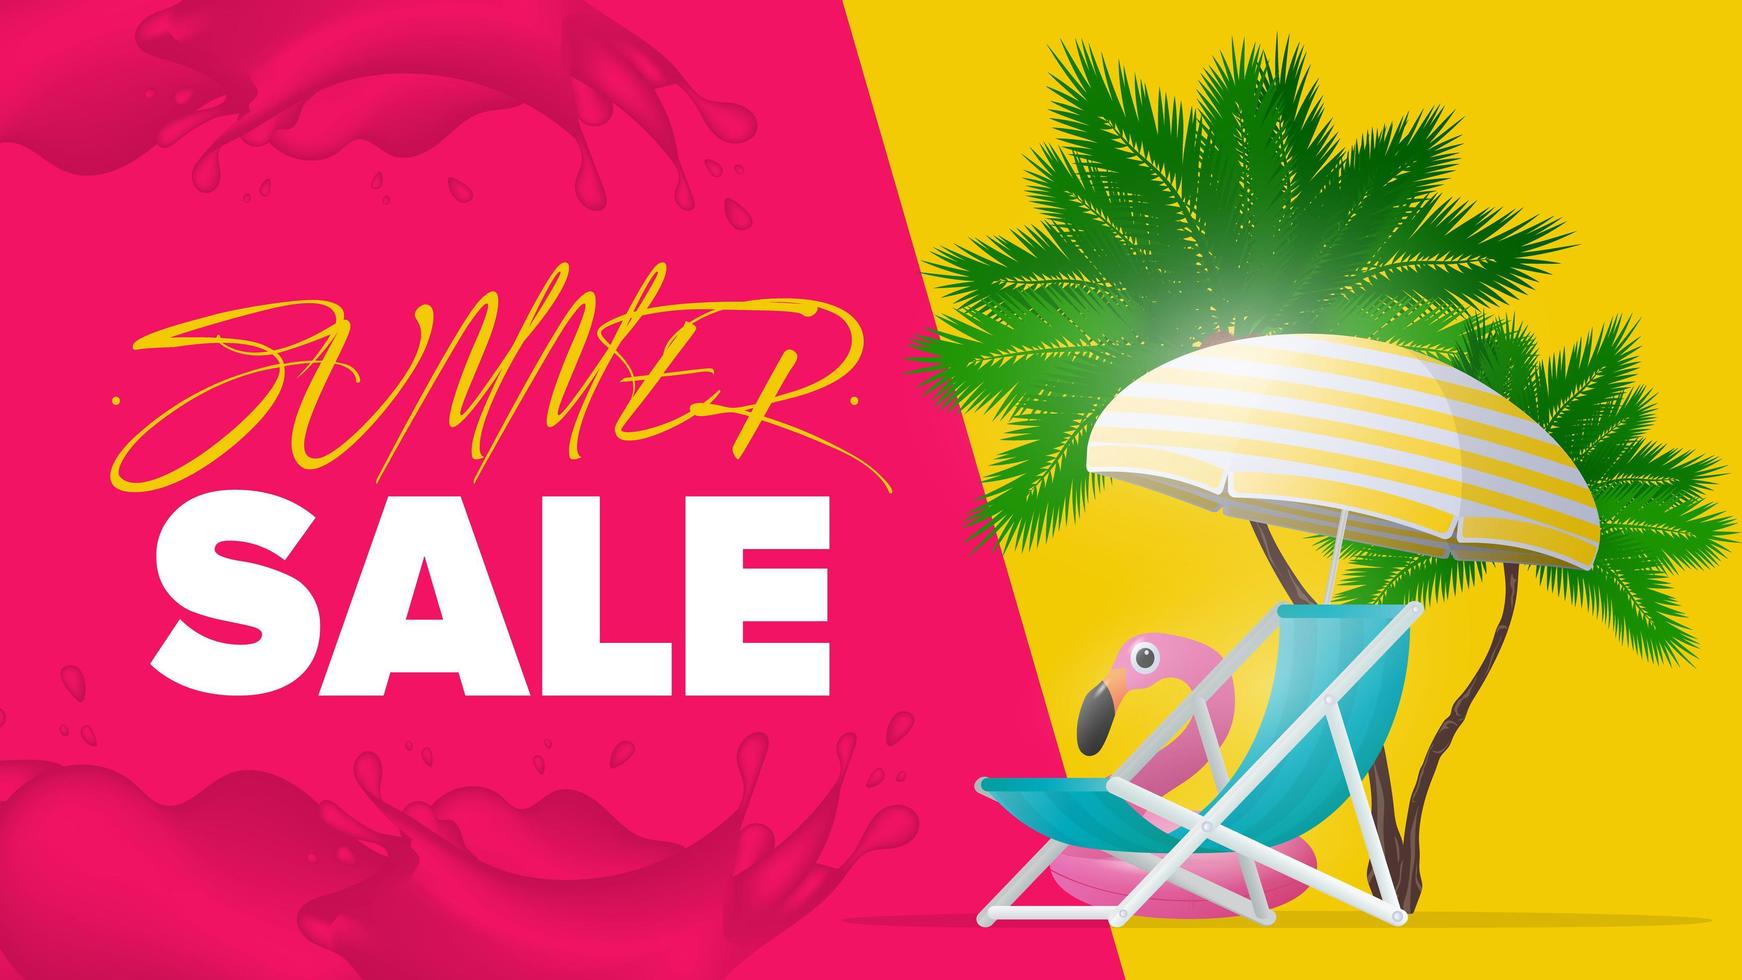 Summer time sale. Deck chair and sun umbrella with yellow stripes isolated on white background. Palm trees and pink flamingo swimming circle. Vector illustration